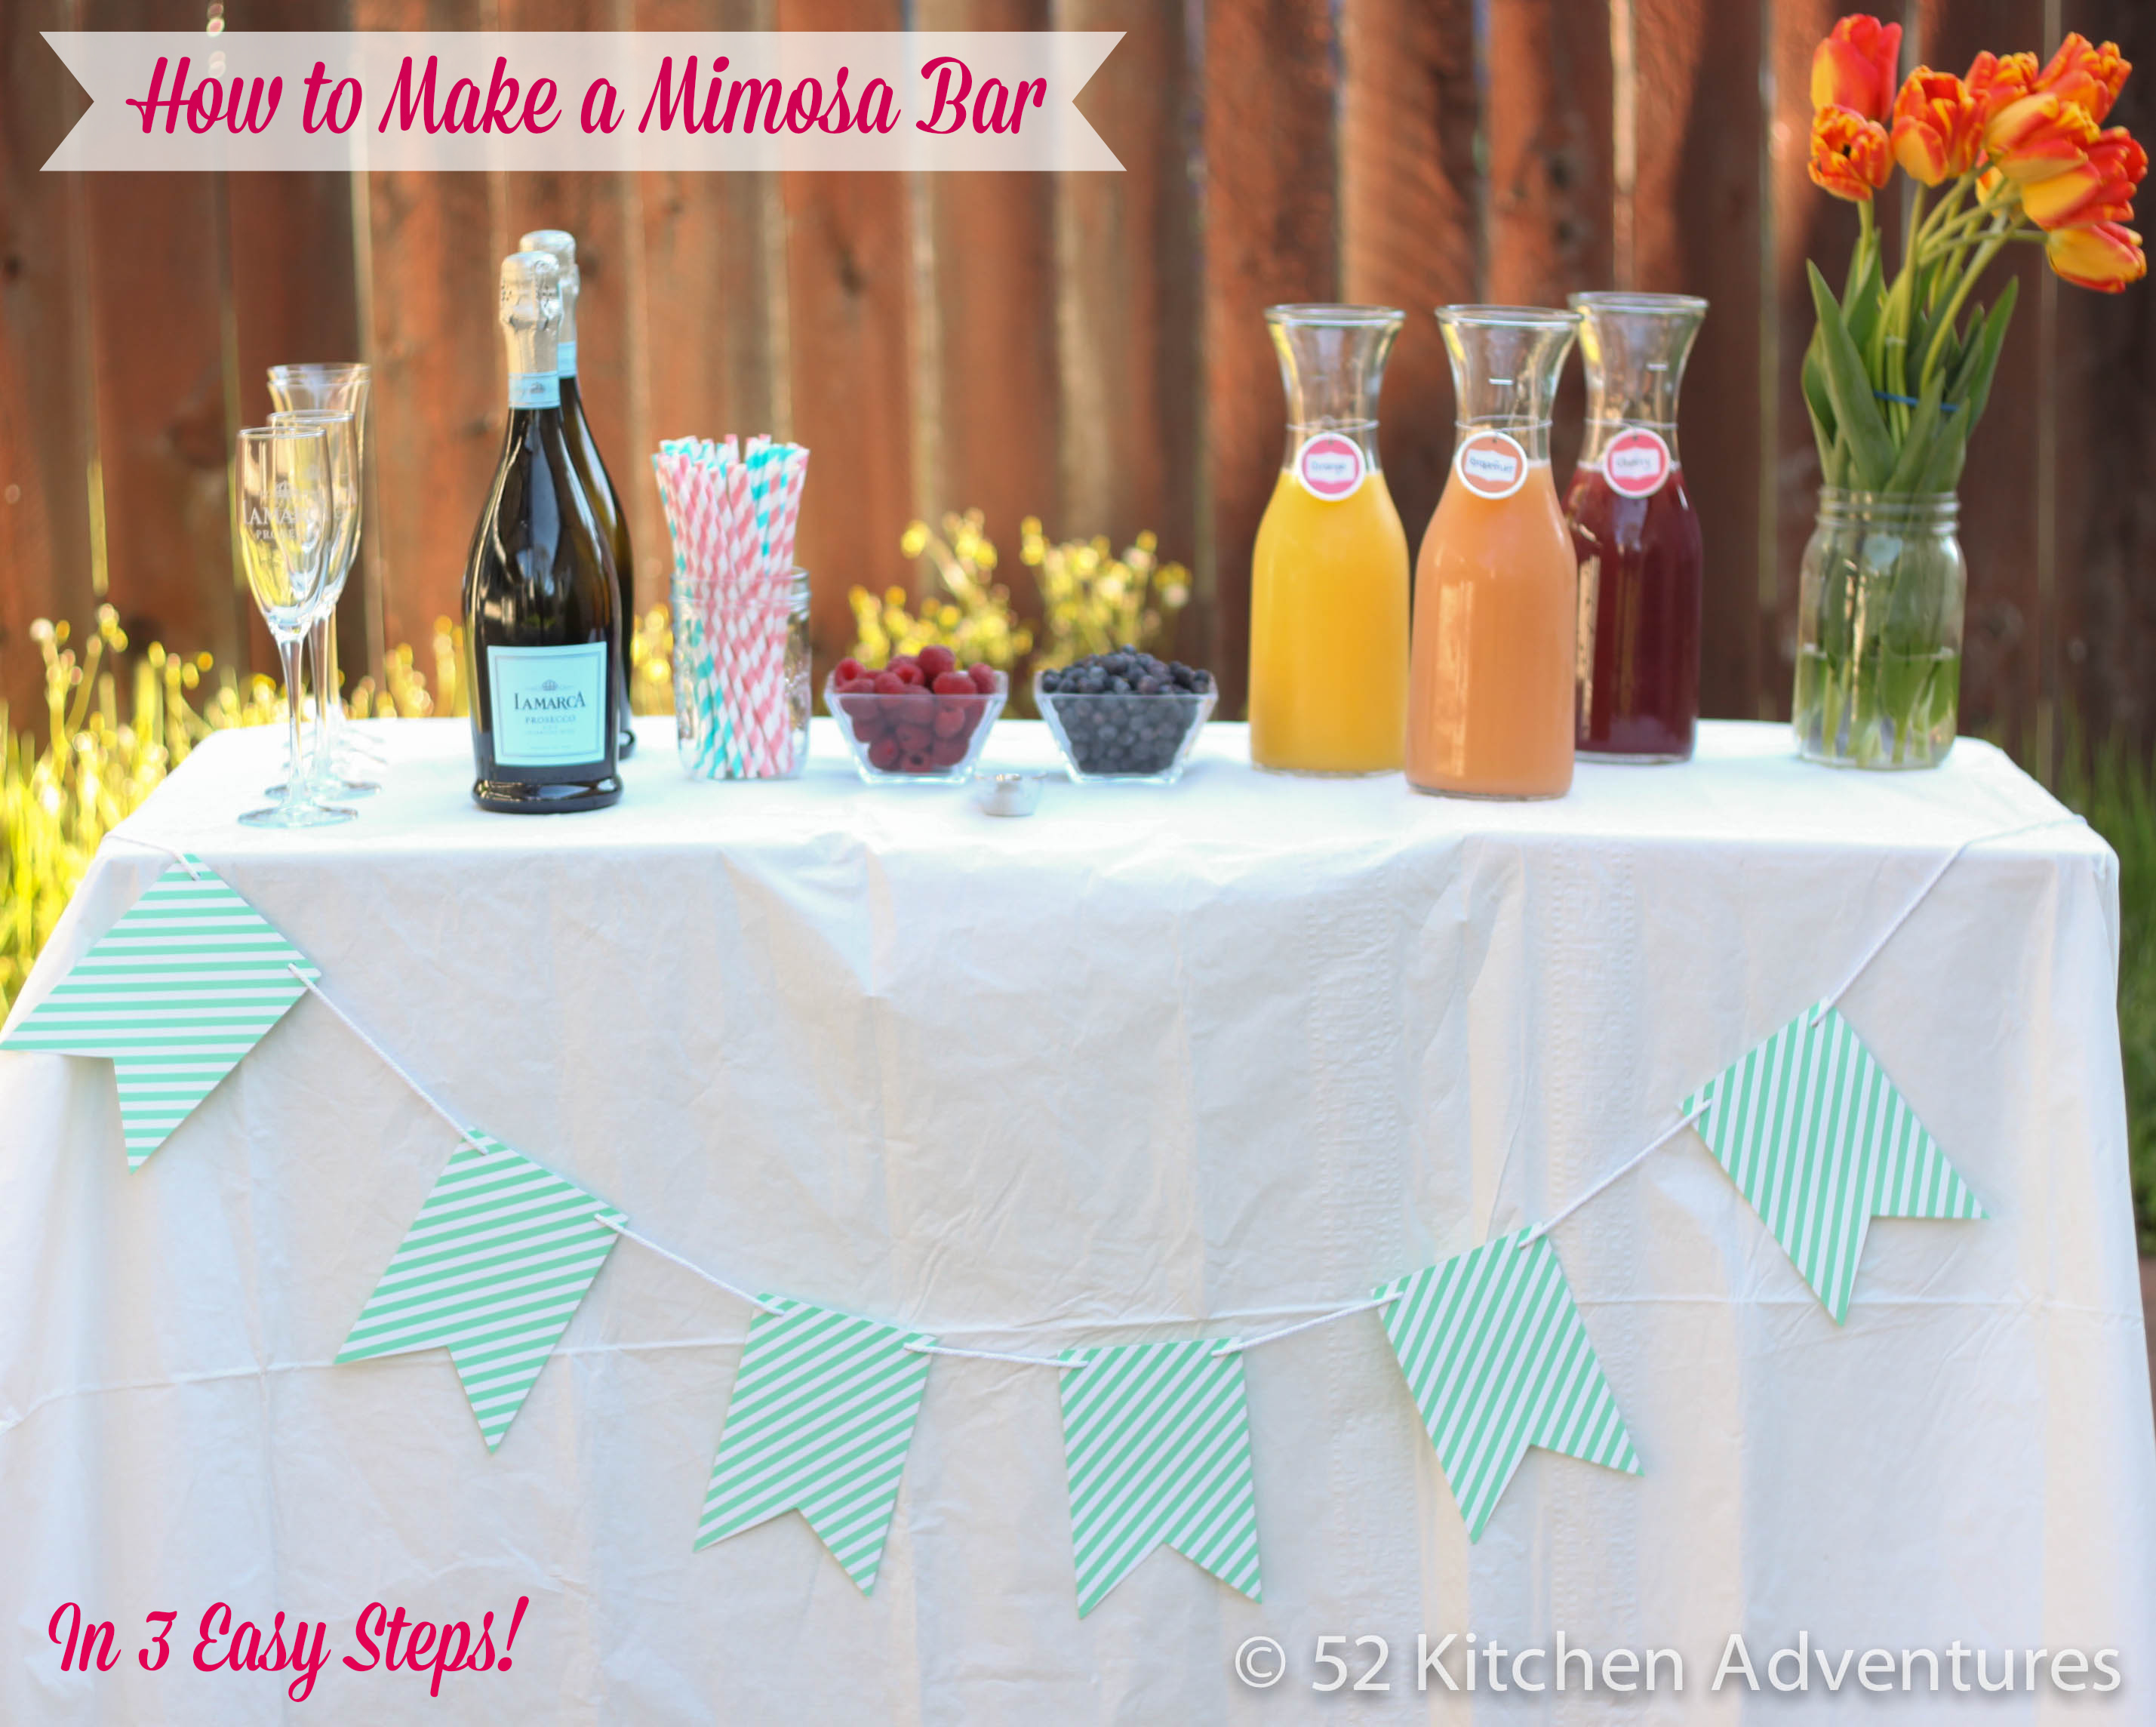 How to Make a Mimosa Bar in 3 Easy Steps